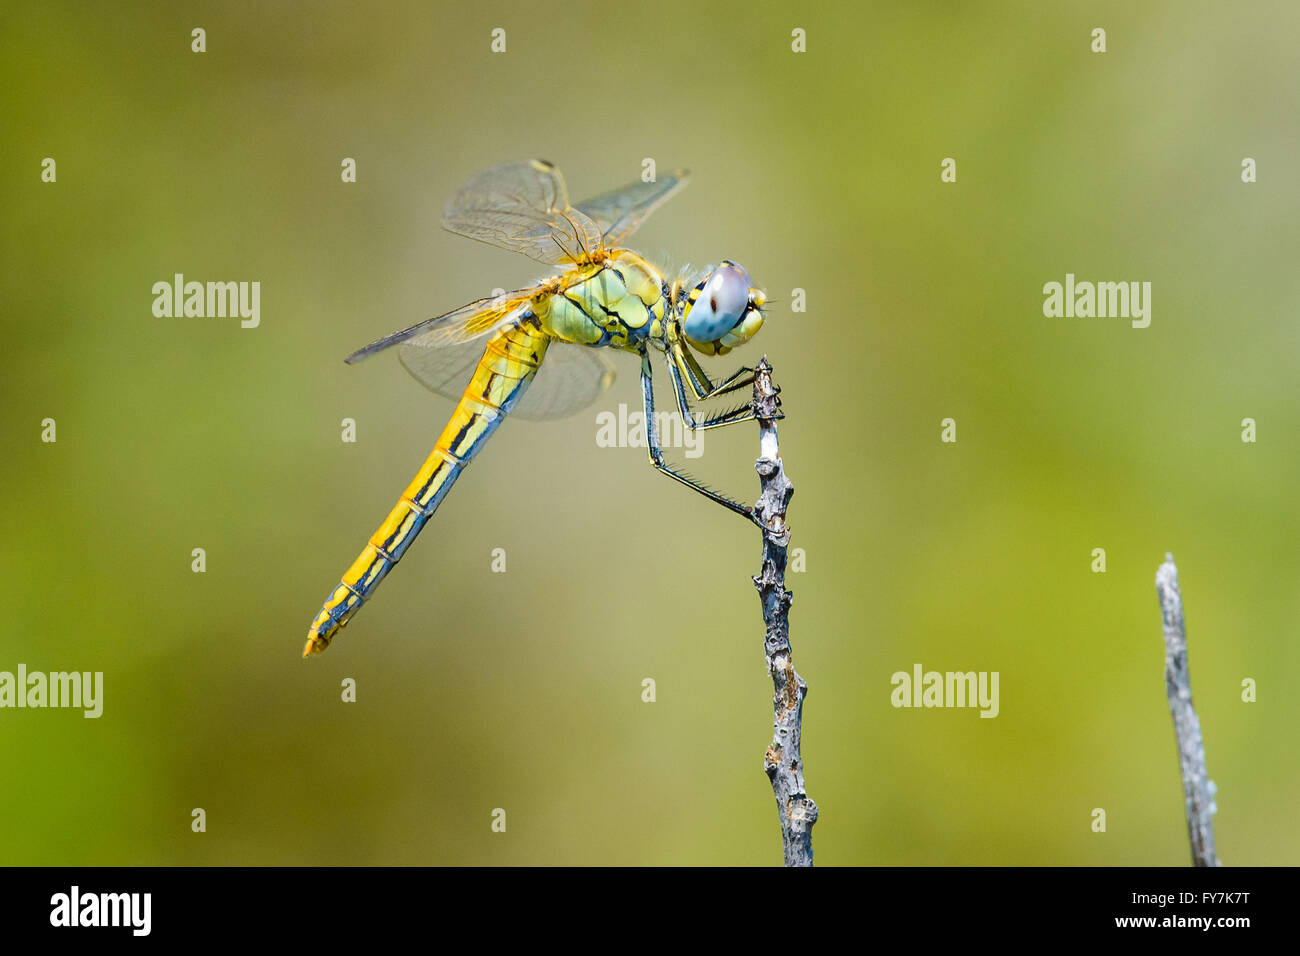 Yellow Dragonfly grabbing a branch Stock Photo